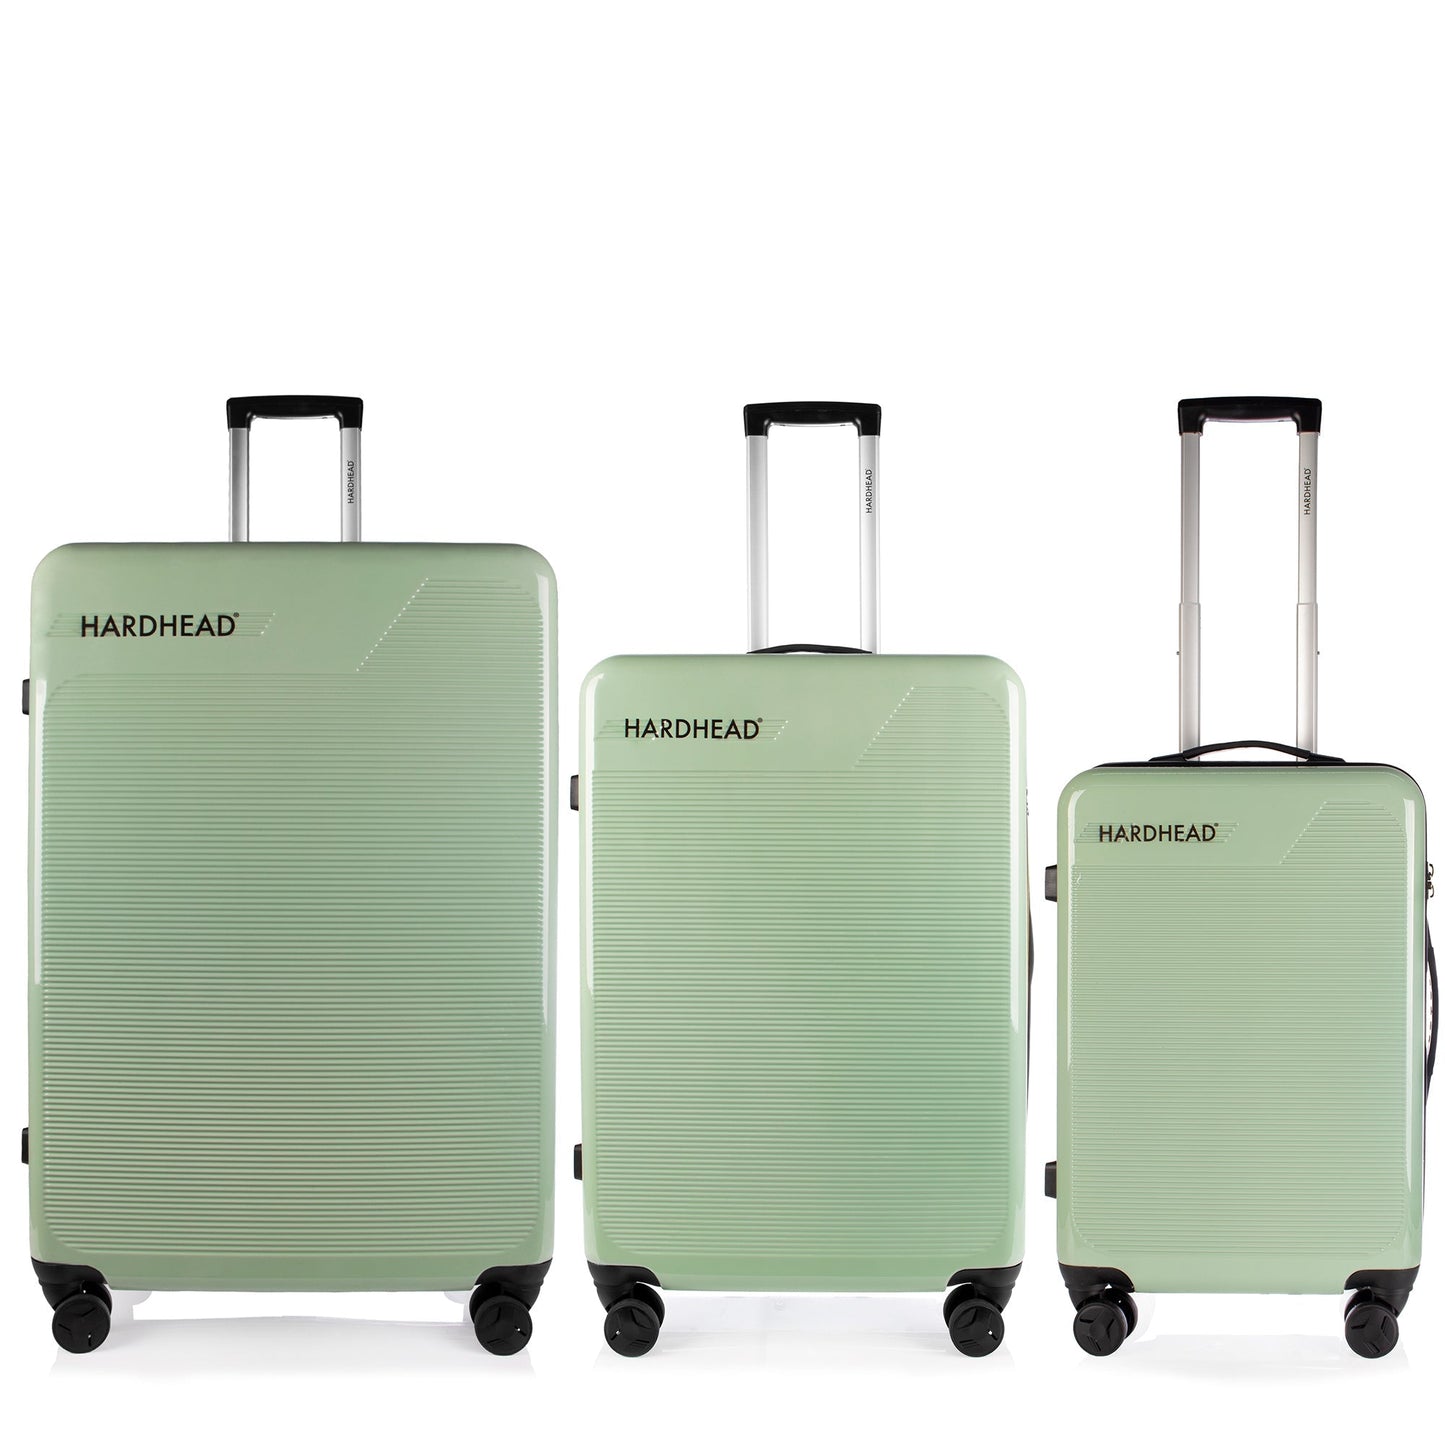 Boost Moon Rock 3 pieces luggage Set